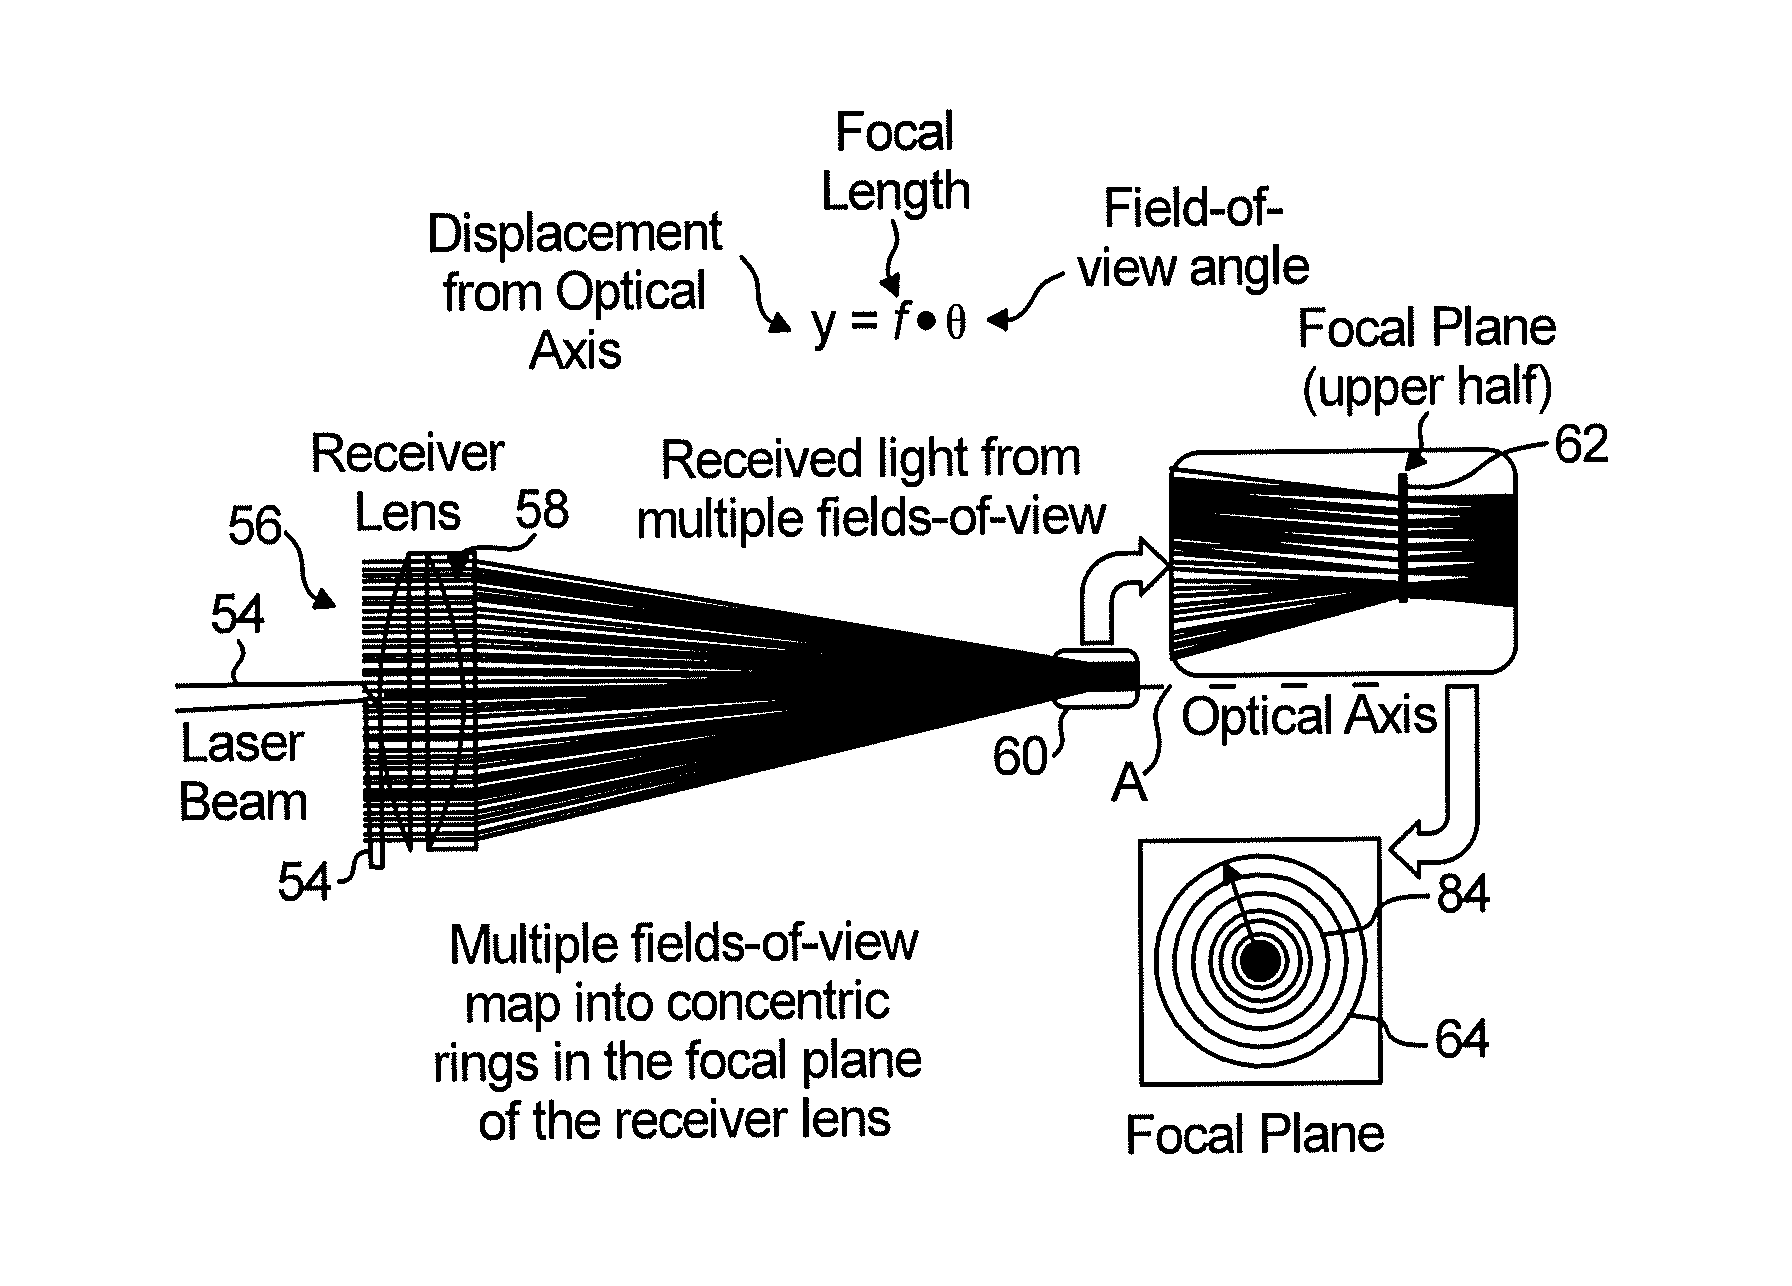 Apparatus and method for detecting aircraft icing conditions